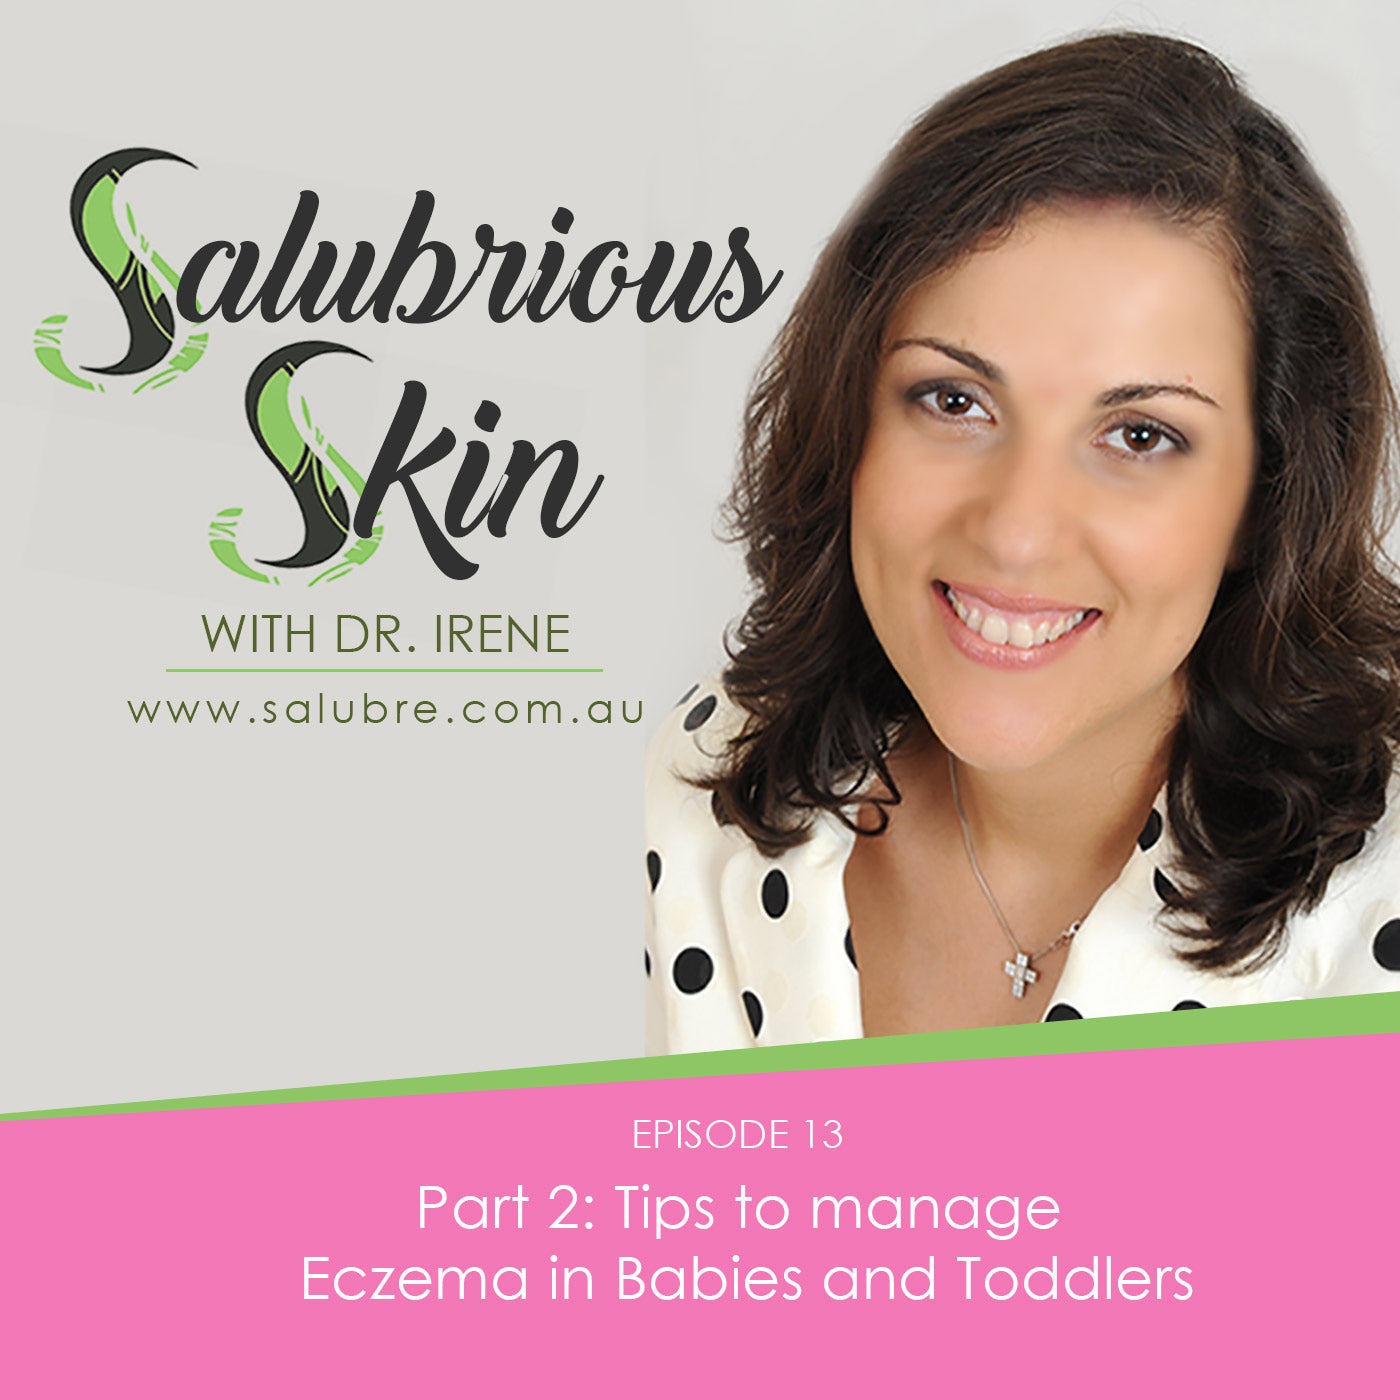 Episode 13: Part 2: Tips to manage Eczema in Babies and Toddlers